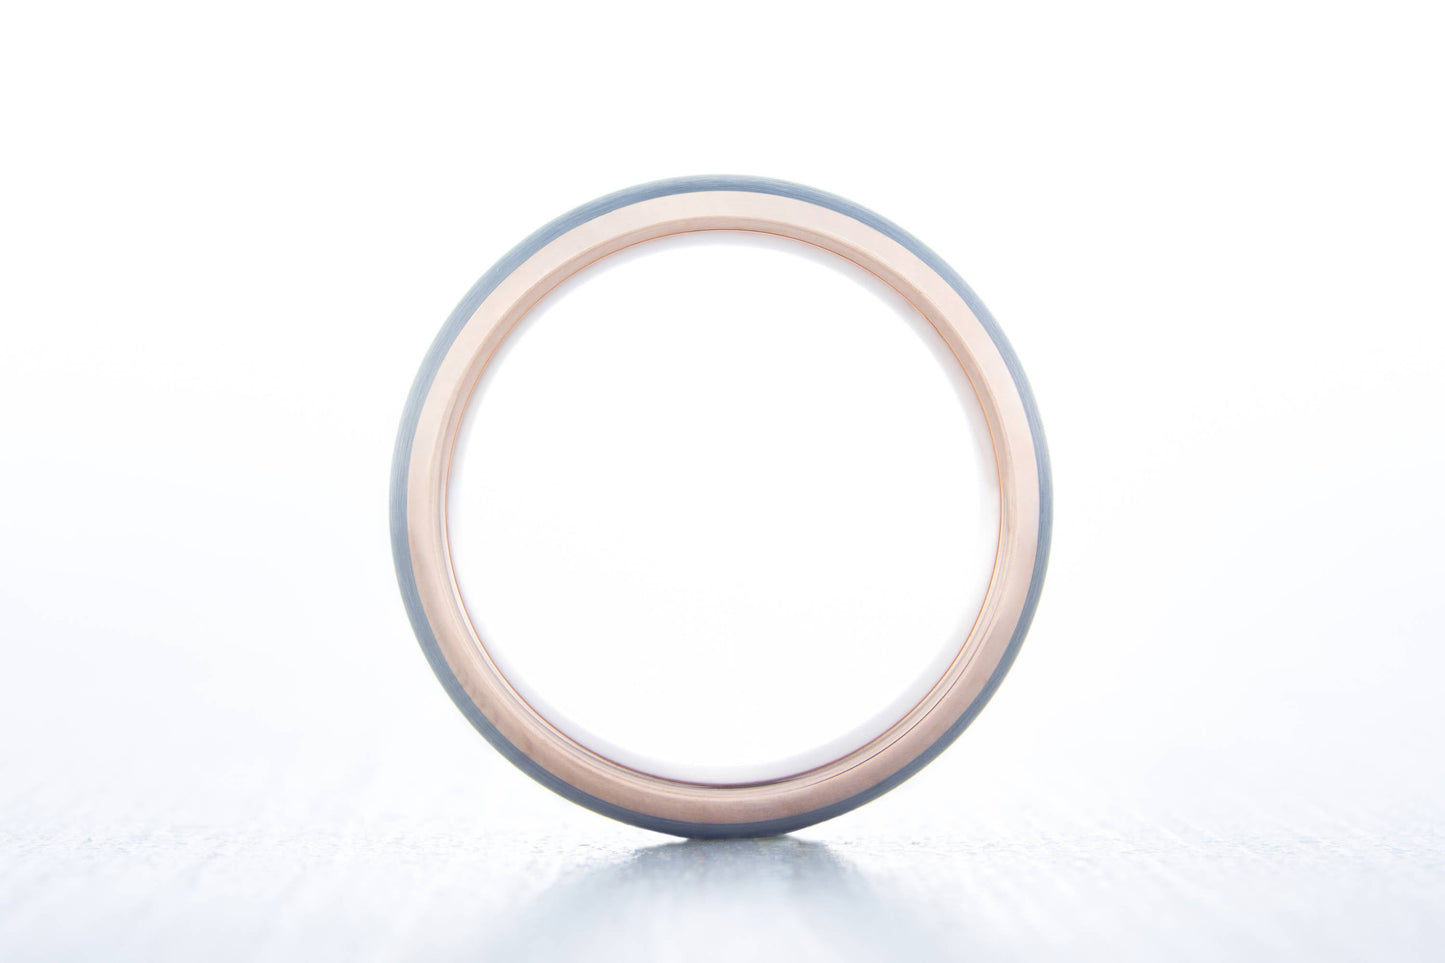 5mm 14K Rose Gold and Brushed Titanium Wedding ring band for men and women